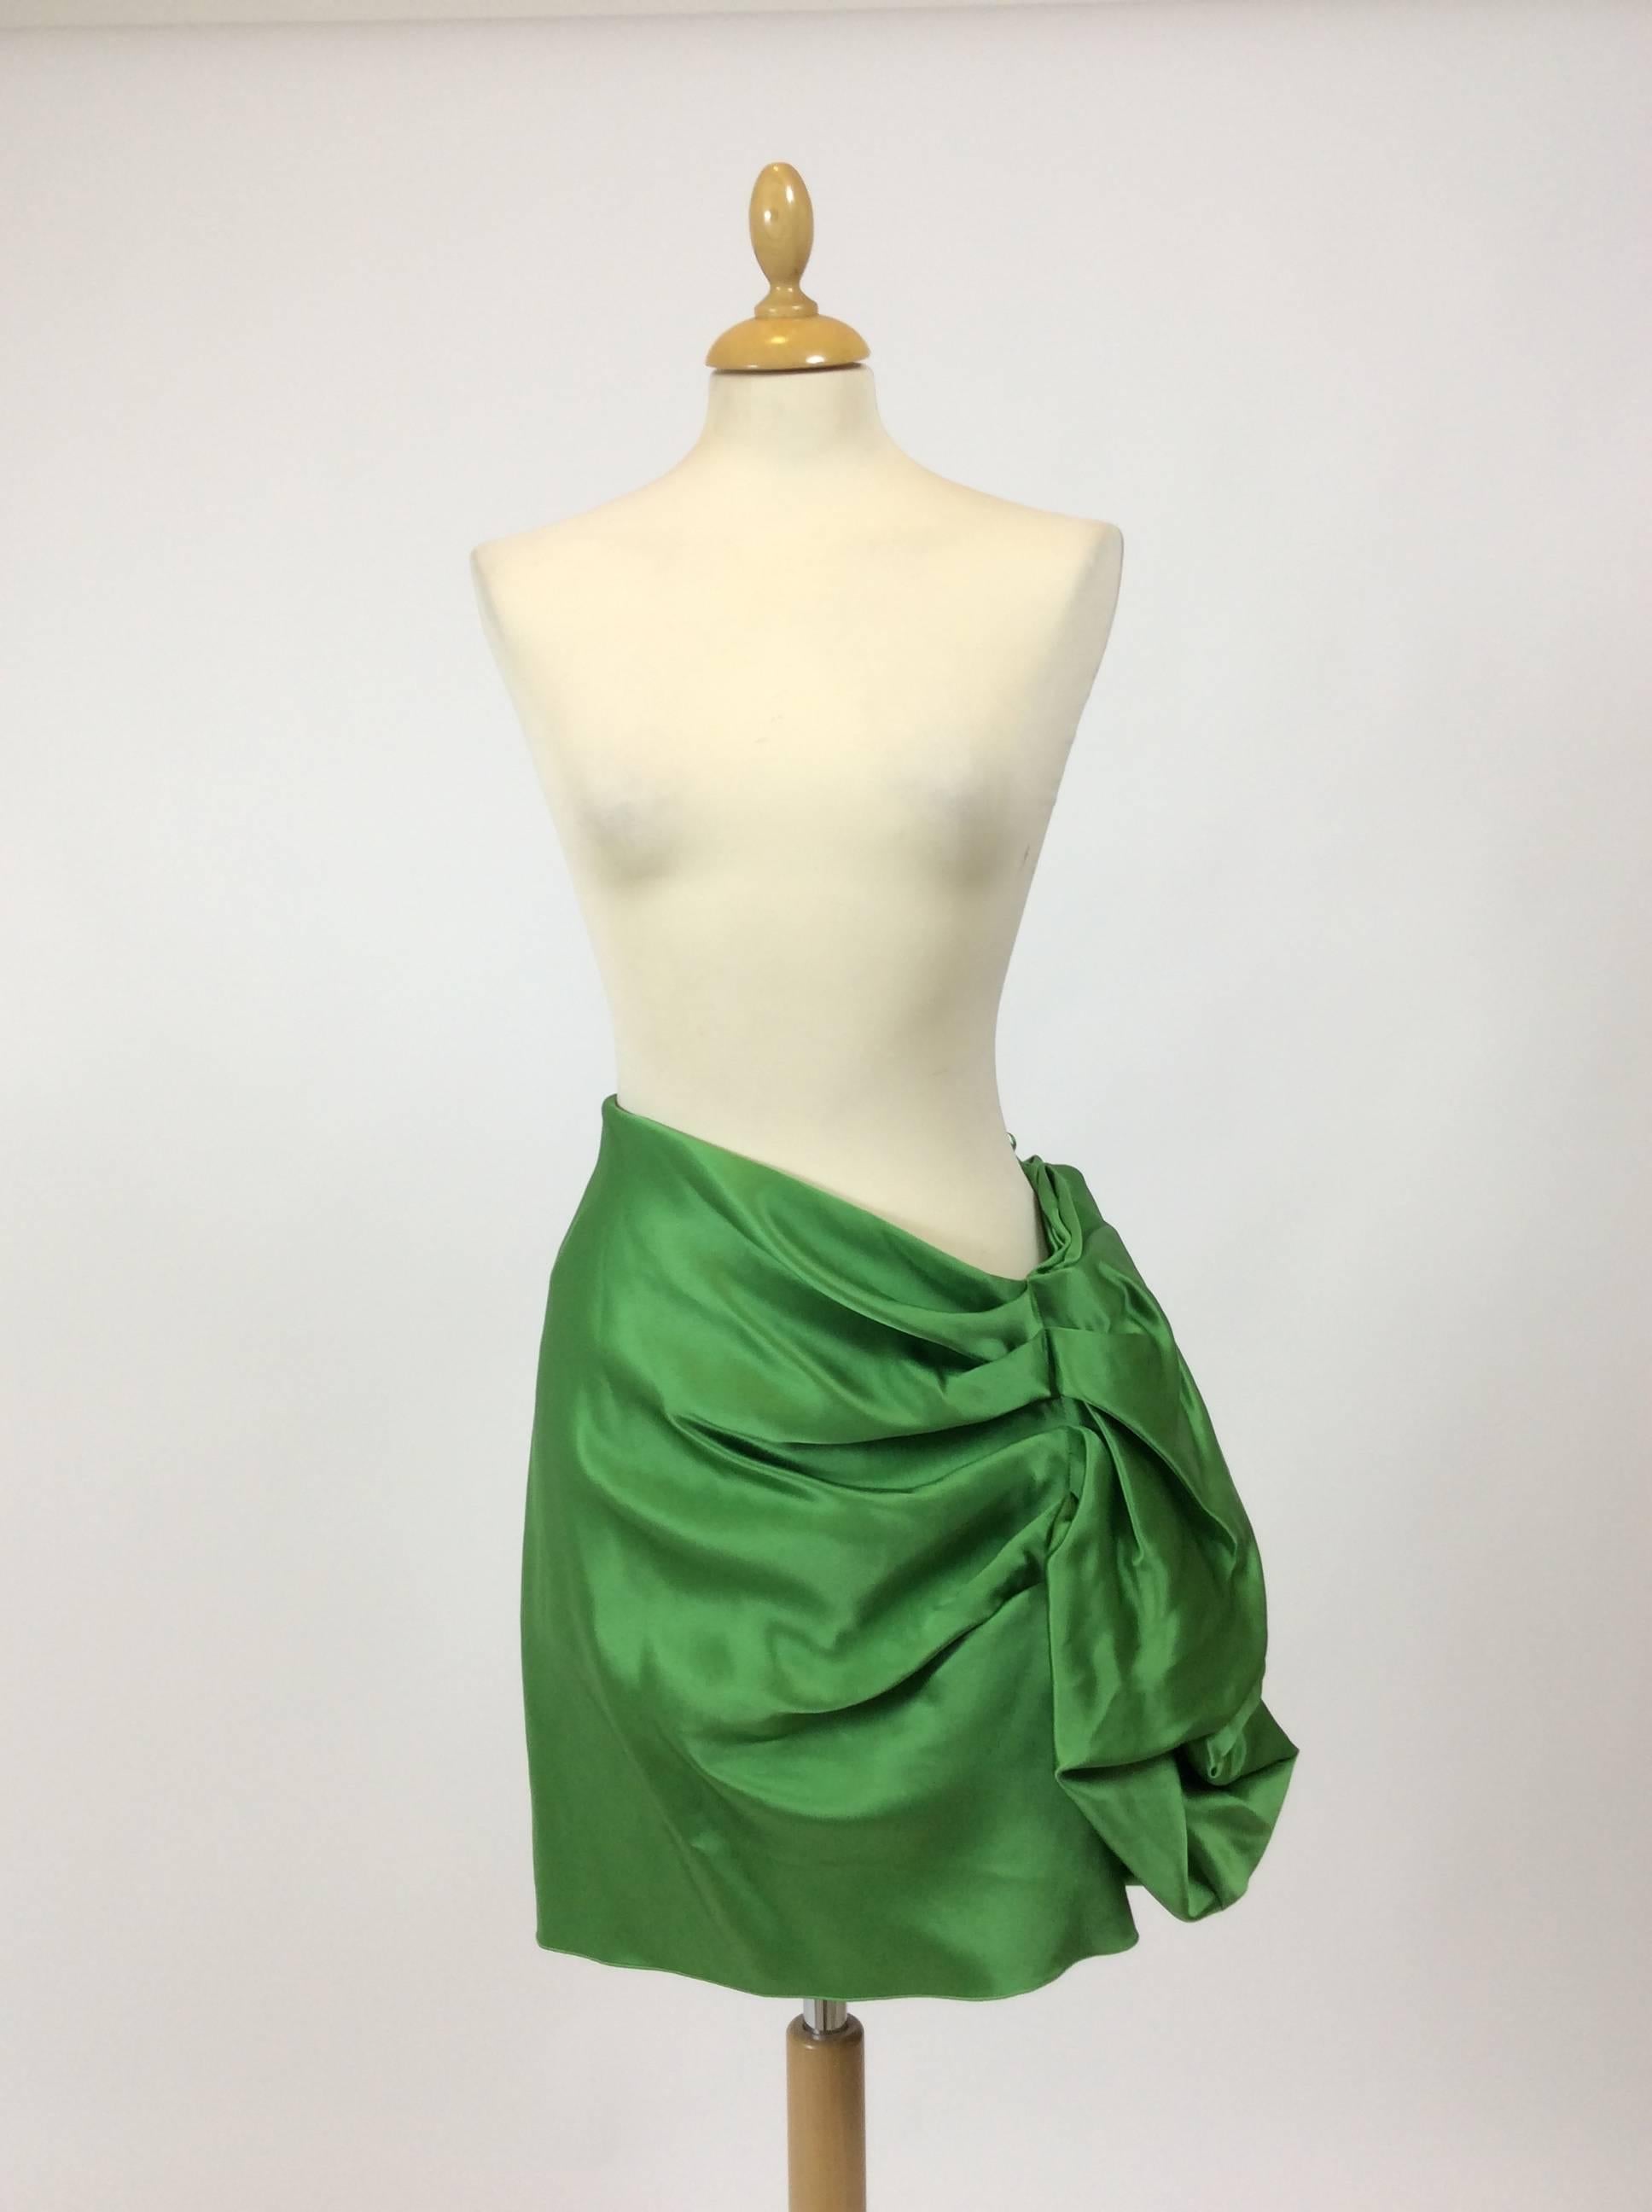 This amazing Lanvin skirt is in fabulous green silk satin fabric. It has a lovely side drapery with flounce and side zip closure. 

Measurements:
Estimated size S/M
Waist 30 inch
Hips 40 inch
Total length 24 inch